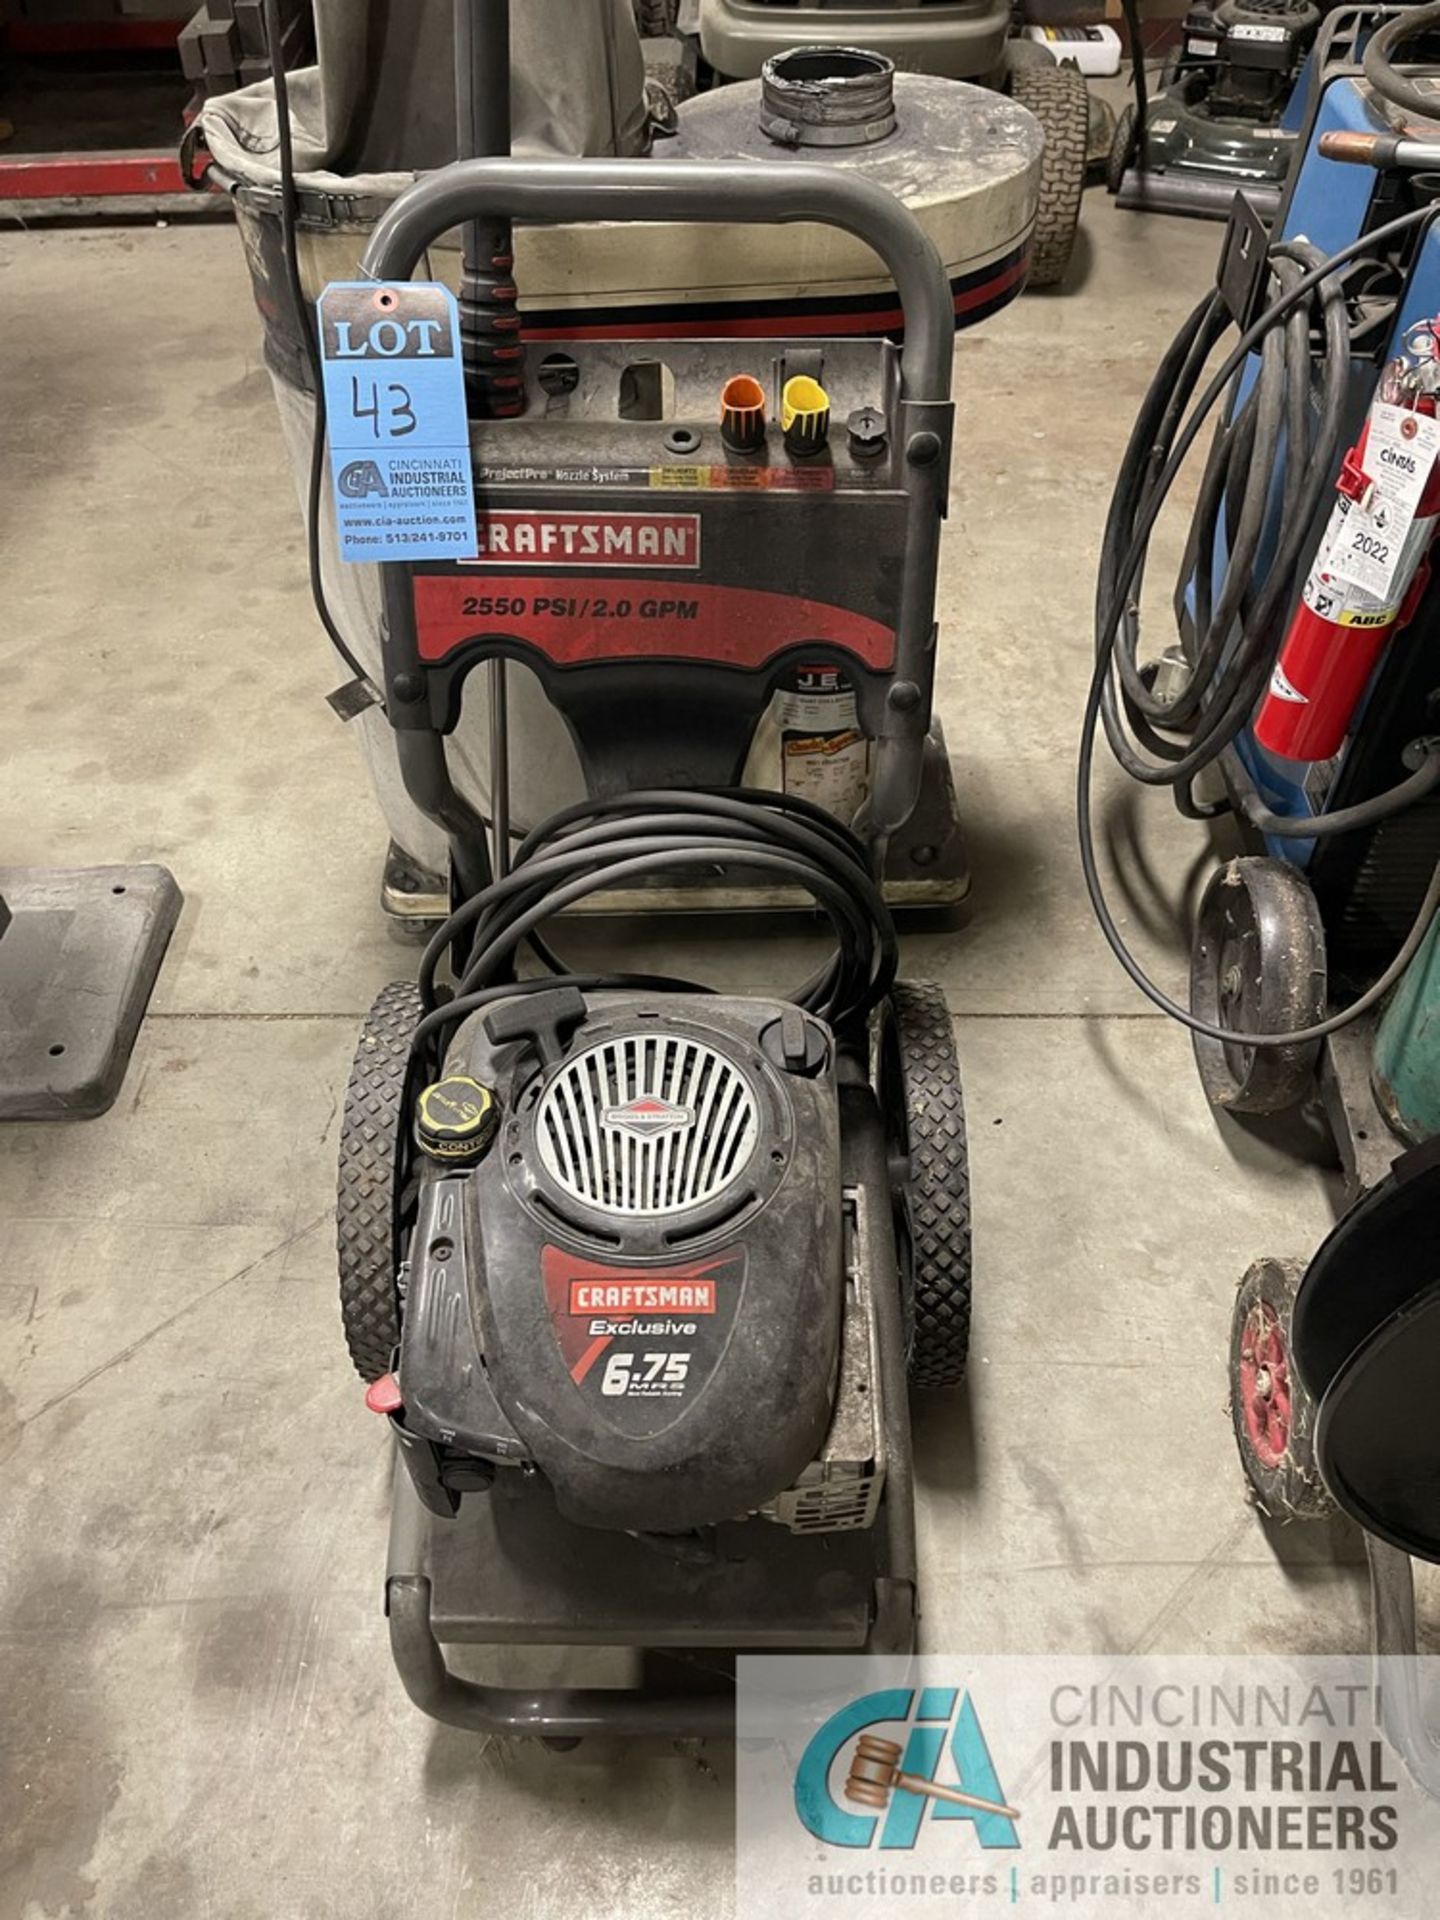 2,550 PSI GAS POWERED CRAFTSMAN PRESSURE WASHER - Image 2 of 3